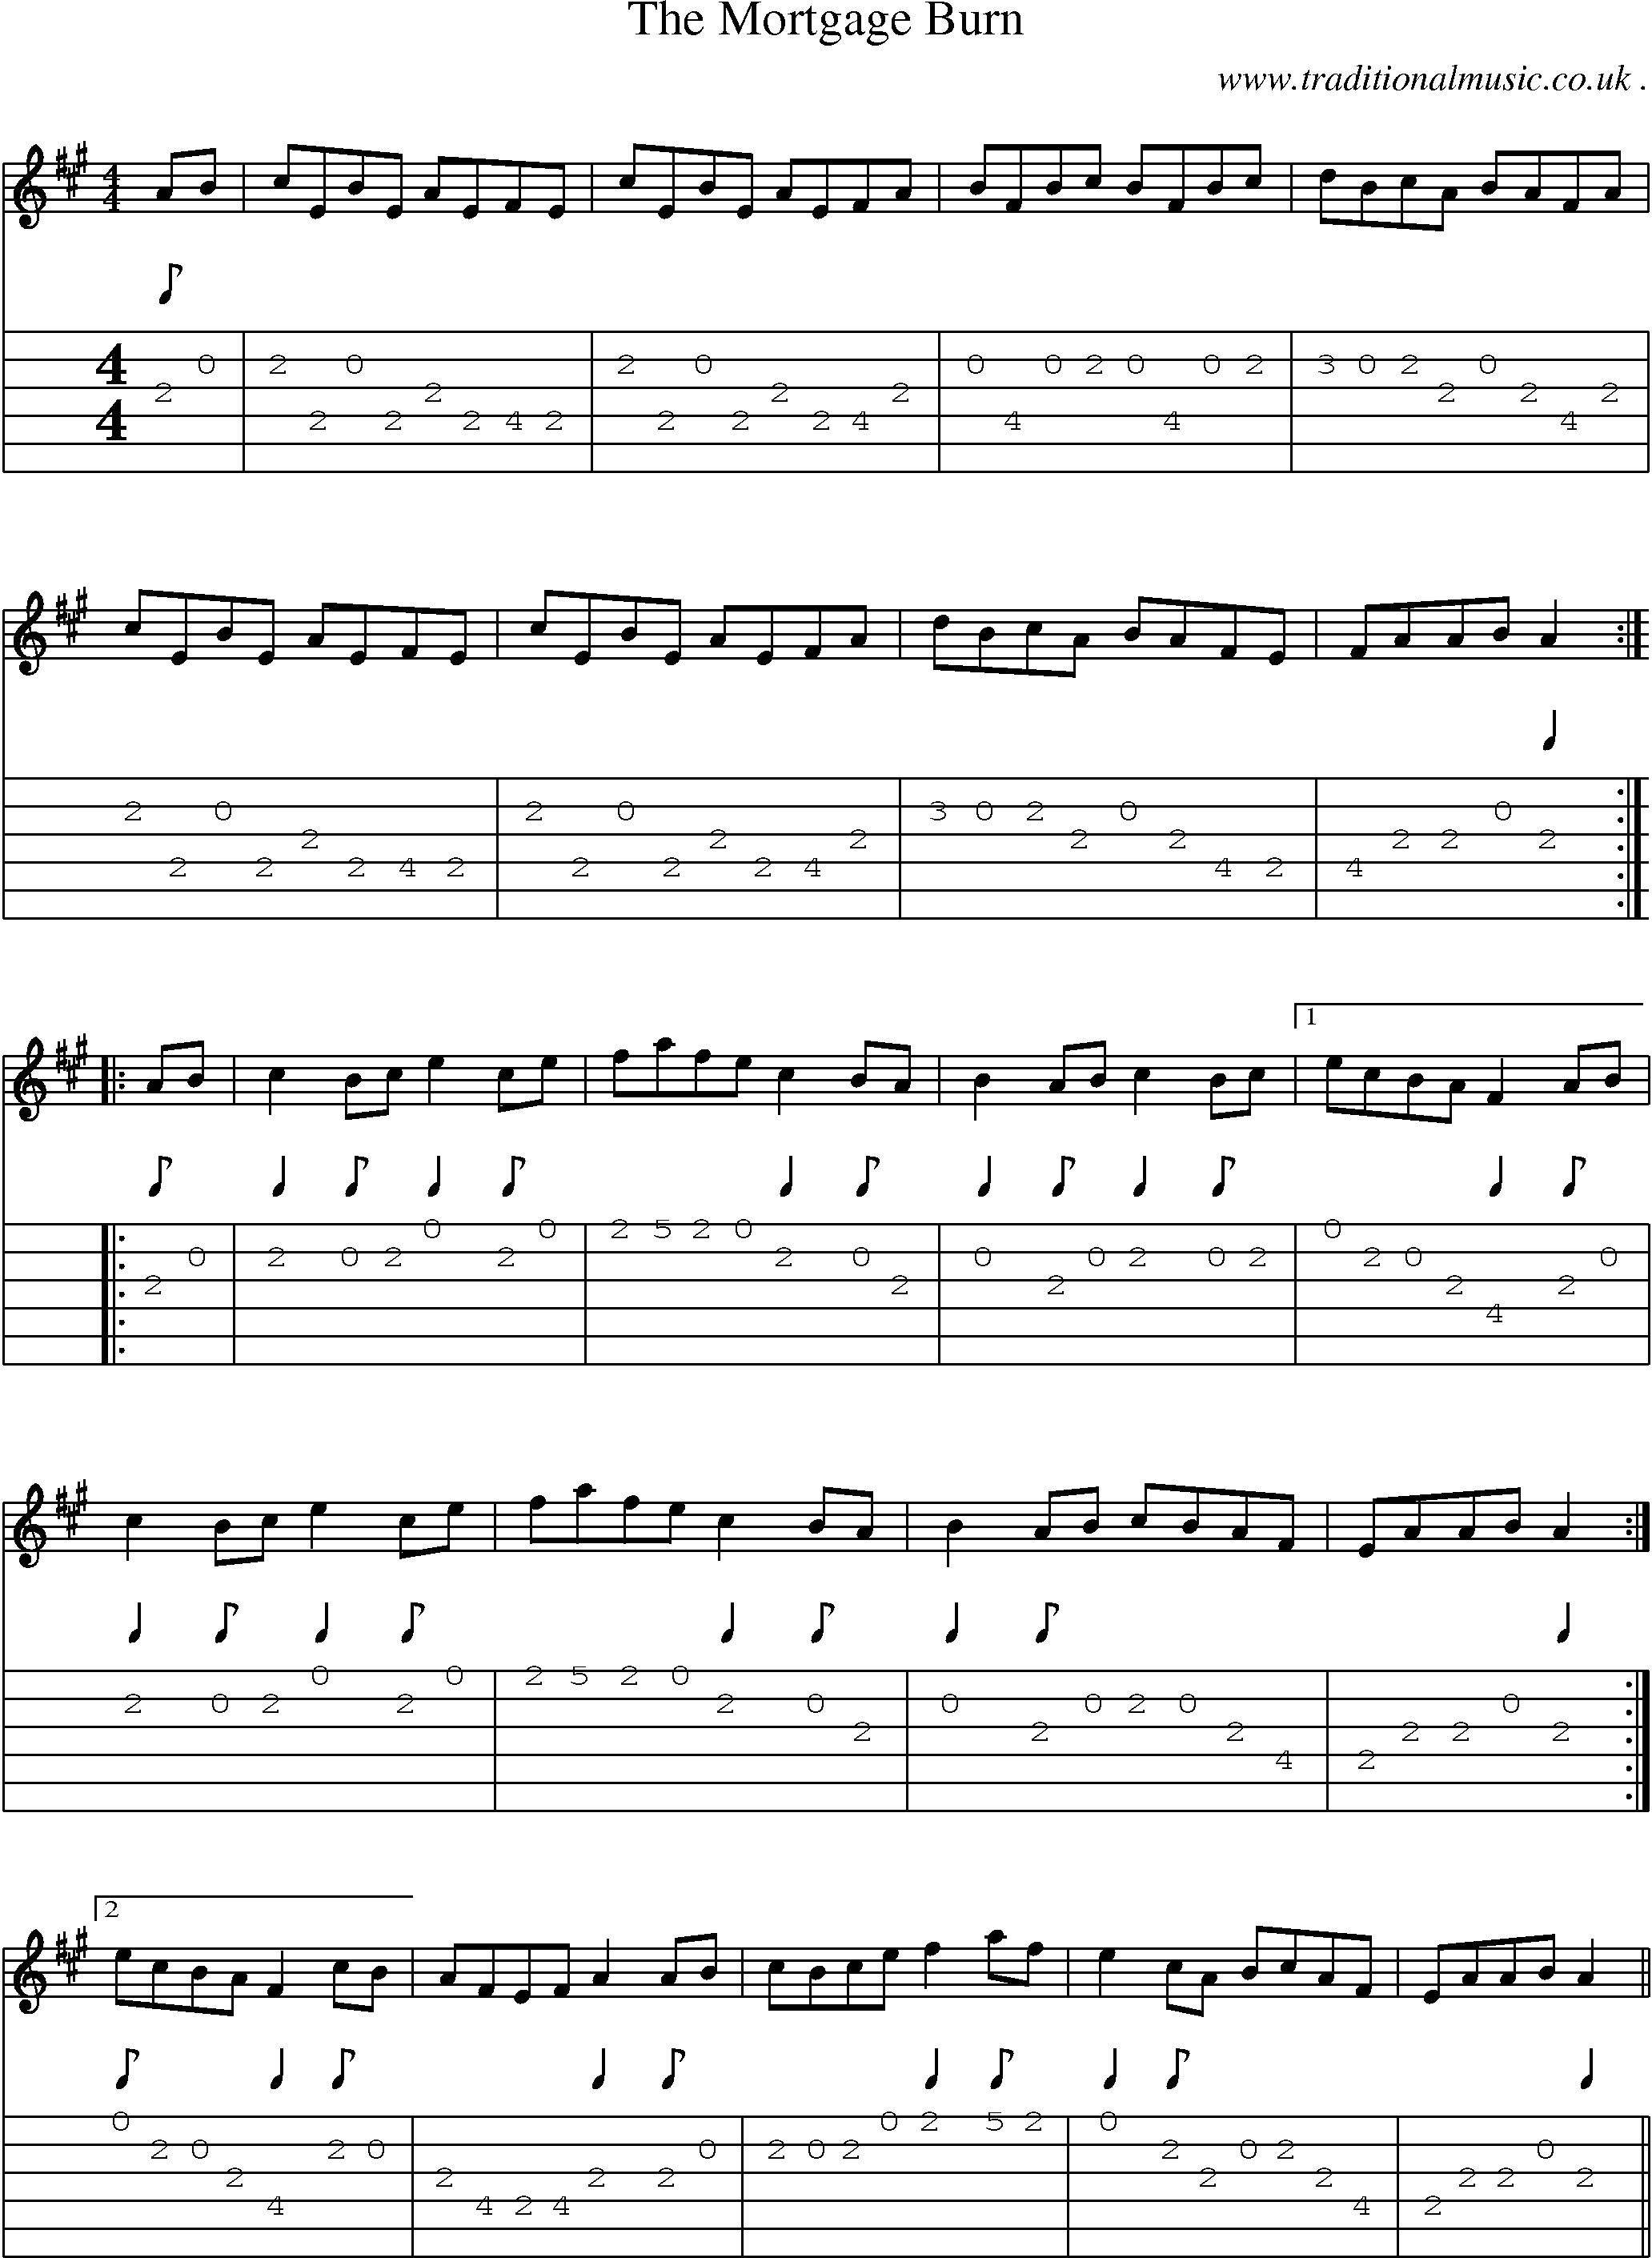 Sheet-Music and Guitar Tabs for The Mortgage Burn